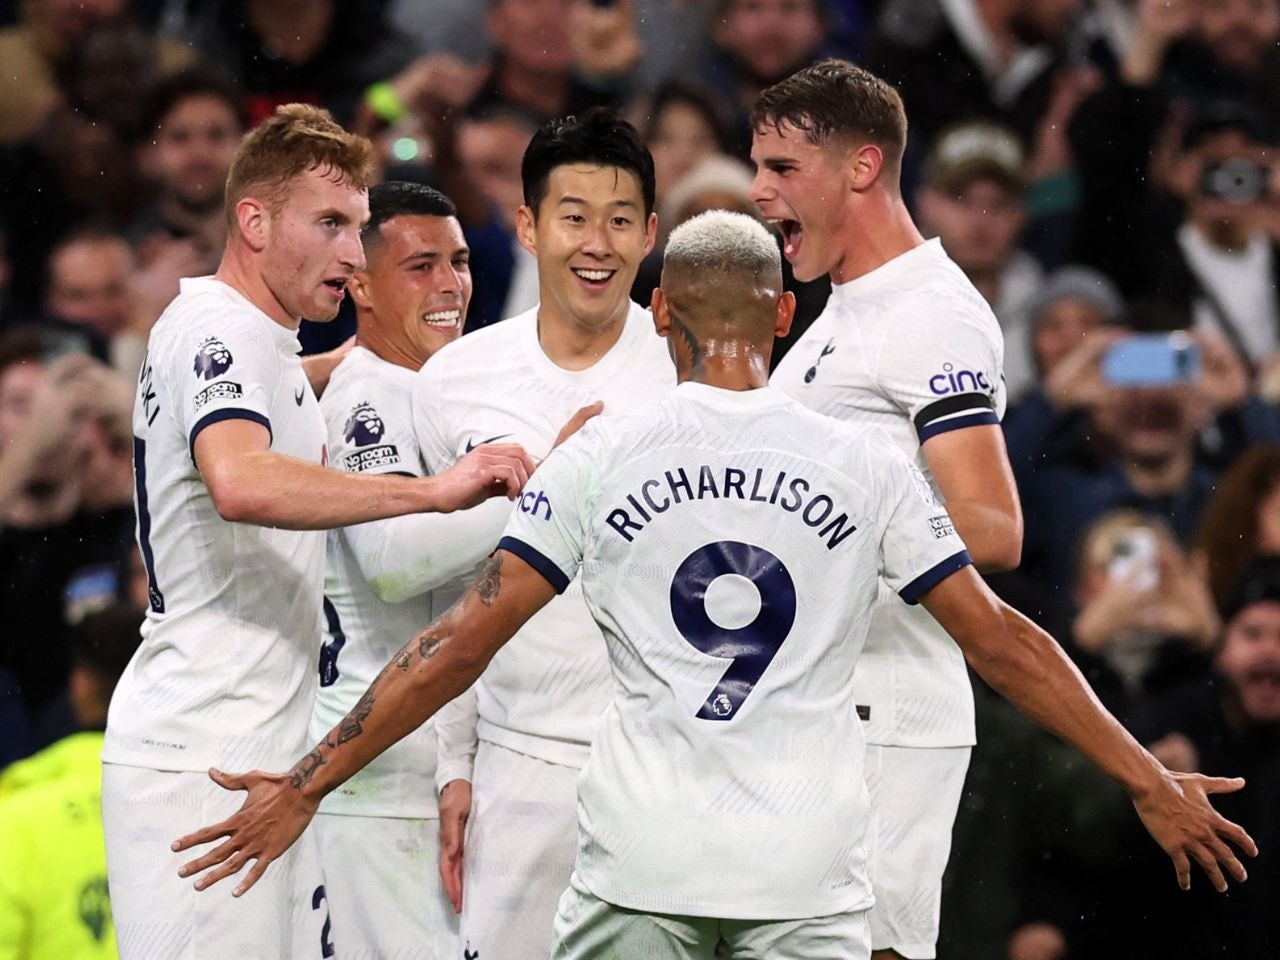 Tottenham 2 Fulham 1 LIVE SCORE: Conte's men hang on late to claim vital  three points at Spurs Stadium - latest updates